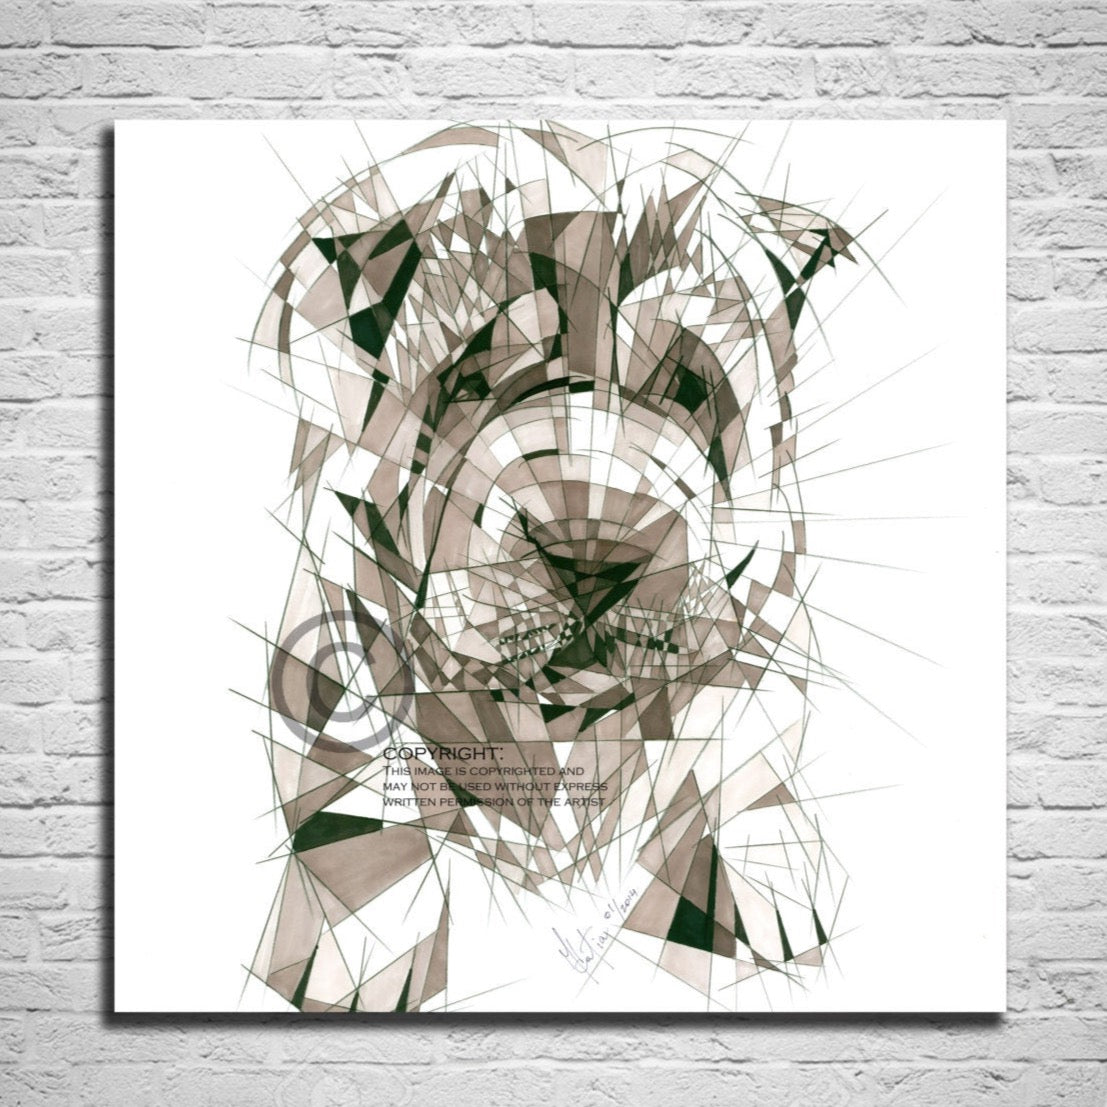 Dog drawing, Pet portrait, CANVAS PRINT, Puppy Pencil Portrait, Abstract Pet Drawing, Wall Art Home Decor ZOO-TP01